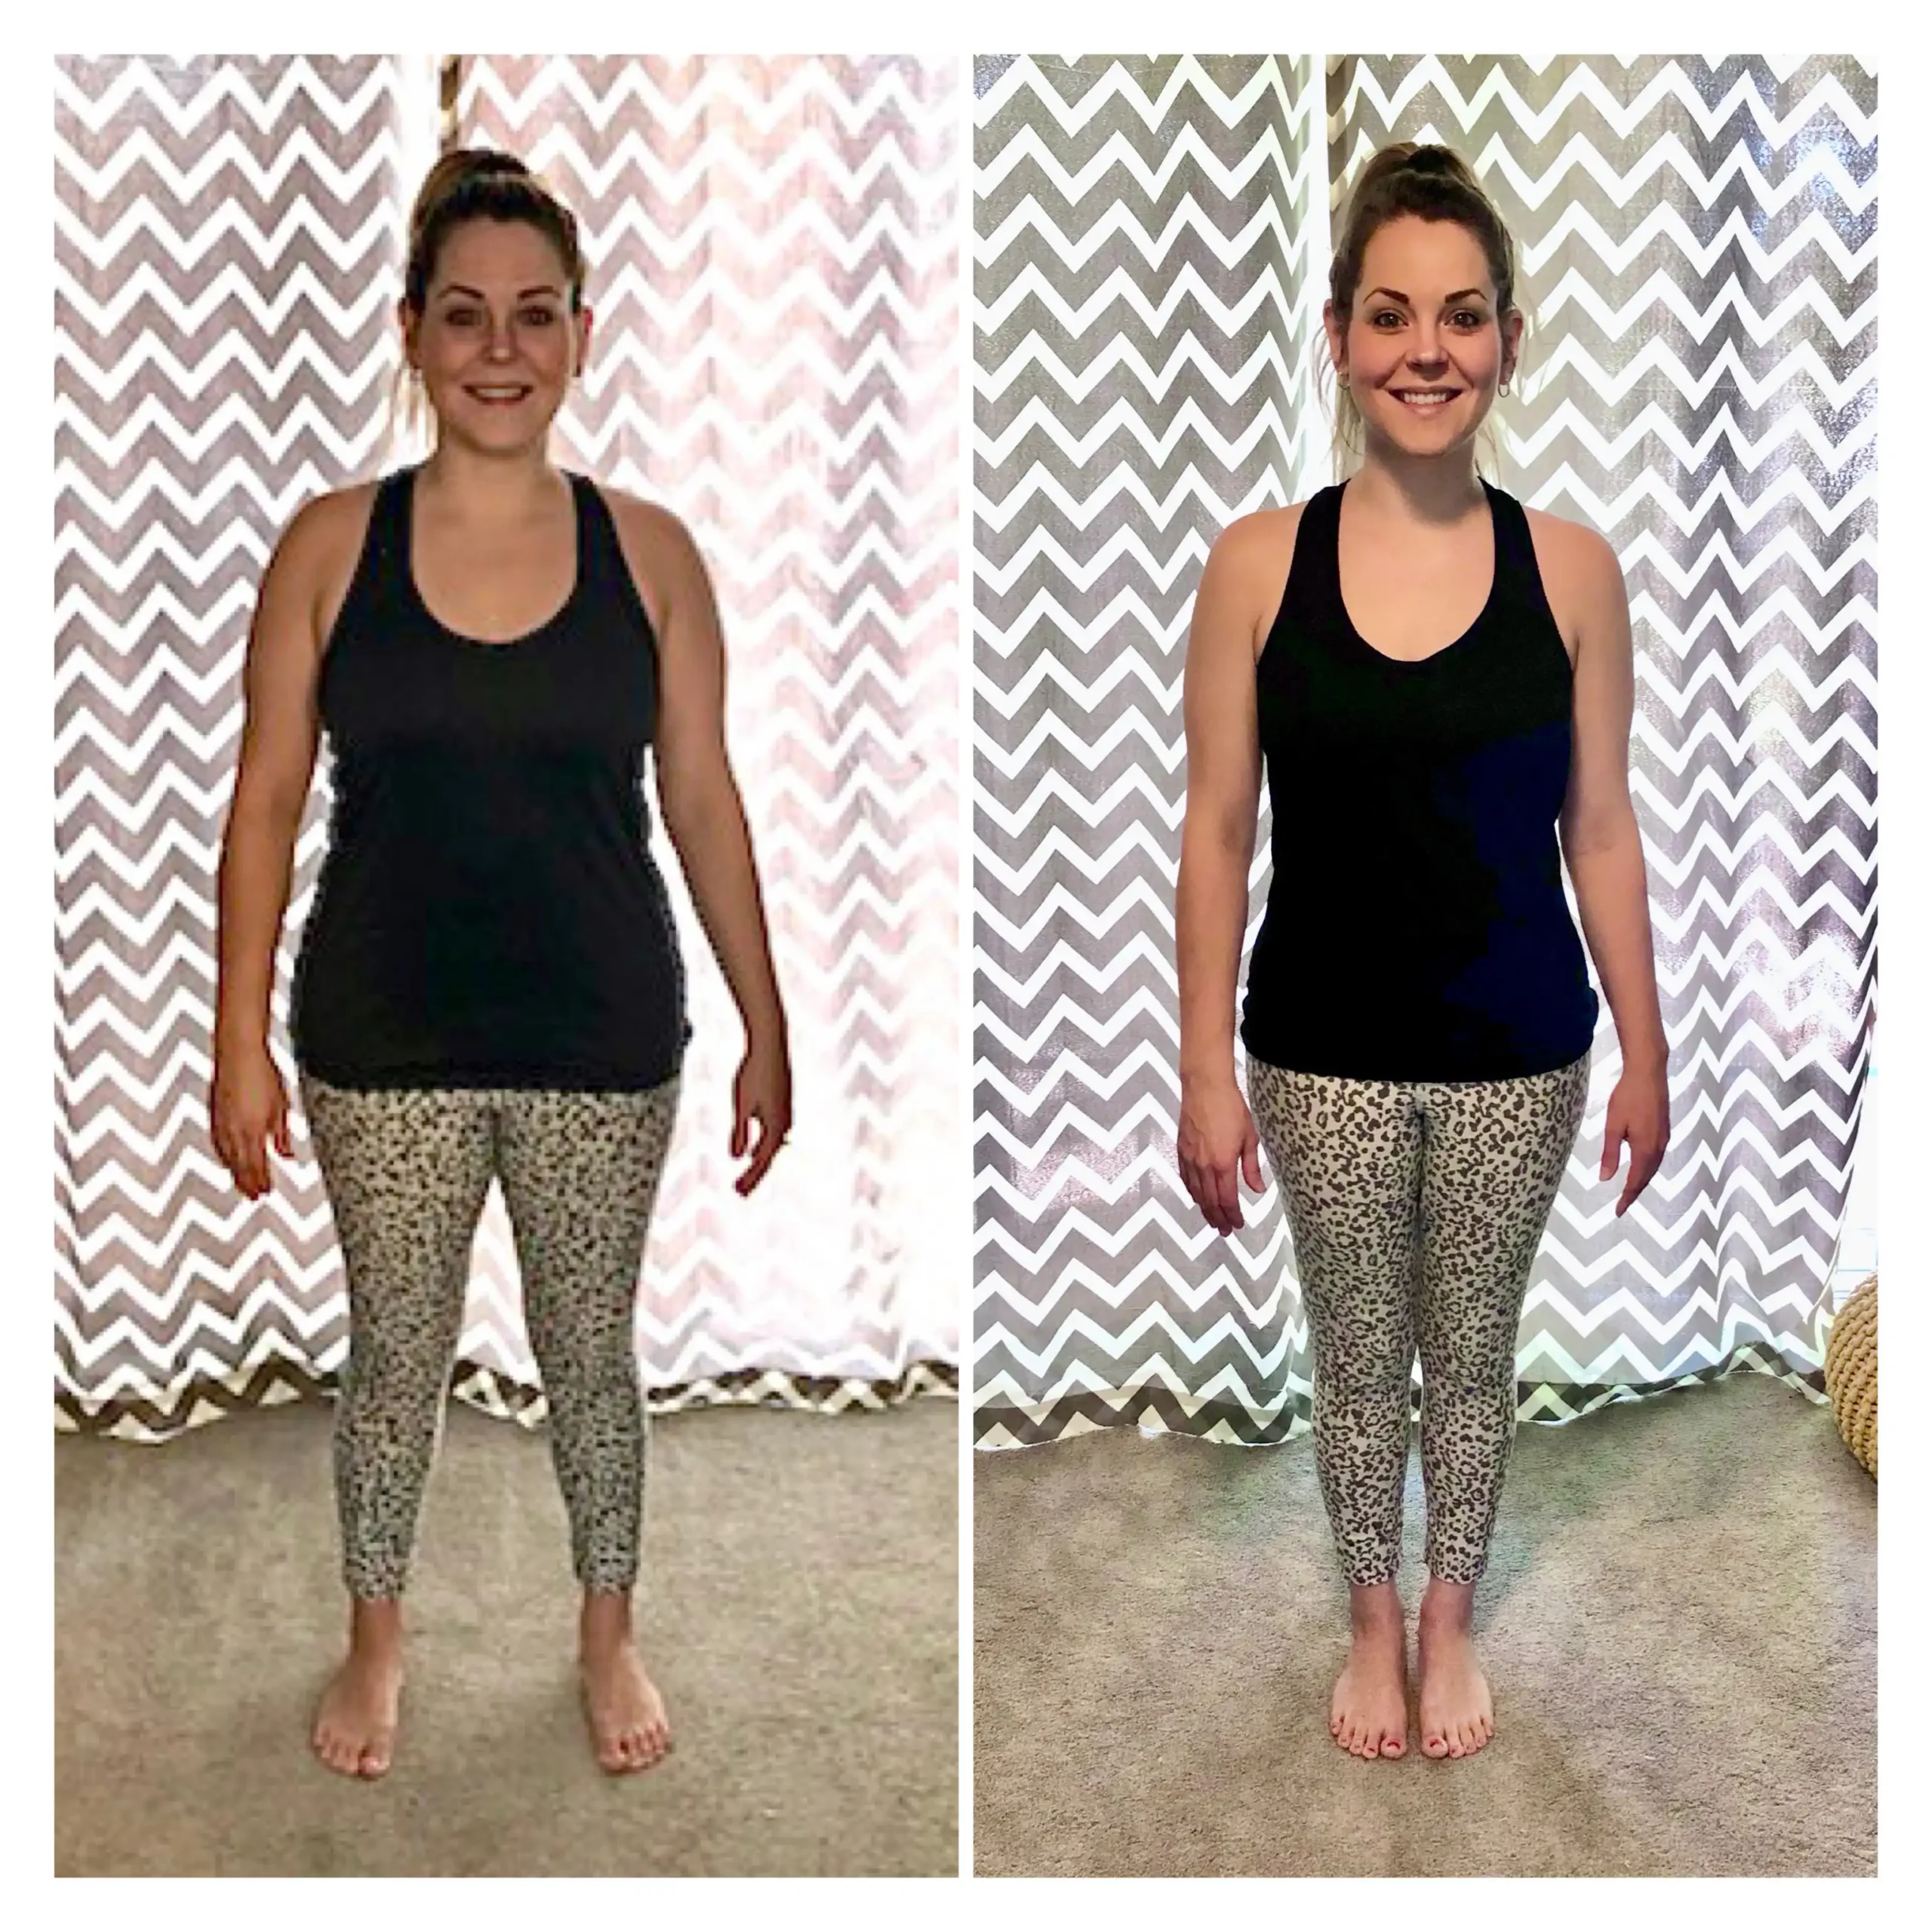 Sarah before and after weight loss front view